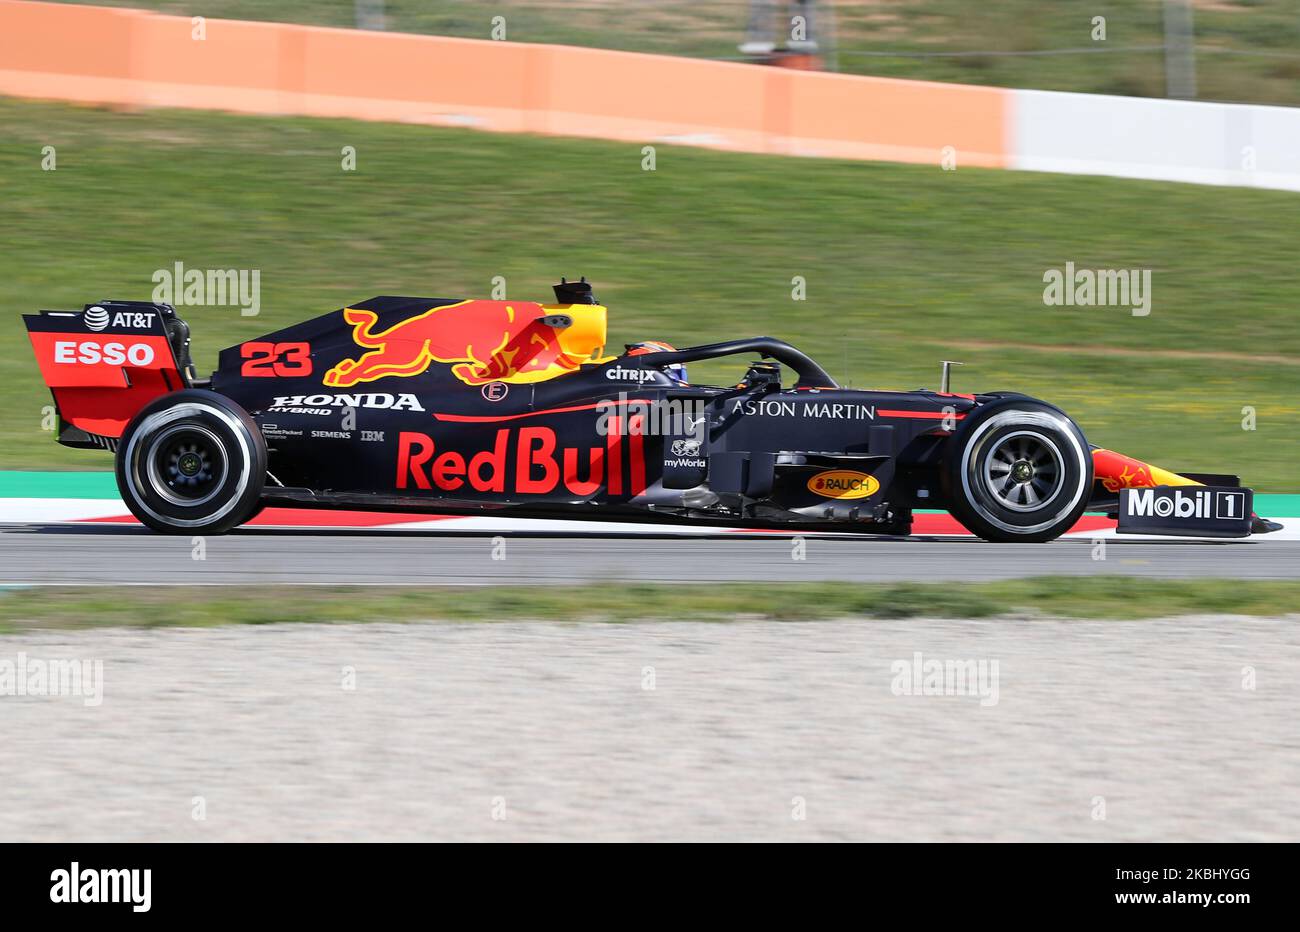 Alexander Albon and the Aston Martin Red Bull RB 16 during the day 4 of the formula 1 testing, on 26 February 2020, in Barcelona, Spain. -- (Photo by Urbanandsport/NurPhoto) Stock Photo